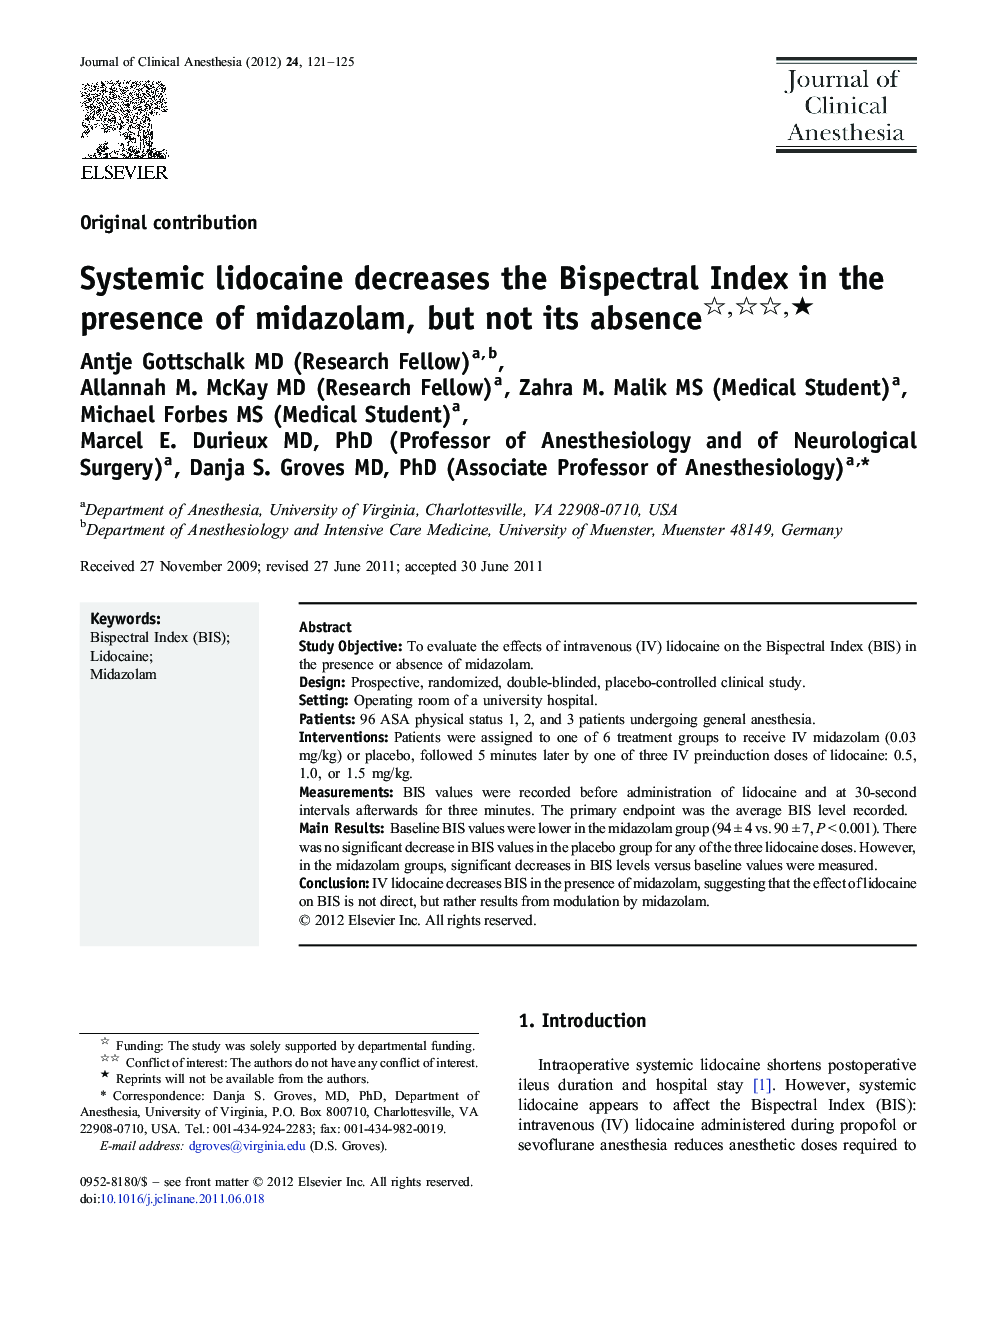 Systemic lidocaine decreases the Bispectral Index in the presence of midazolam, but not its absence ★